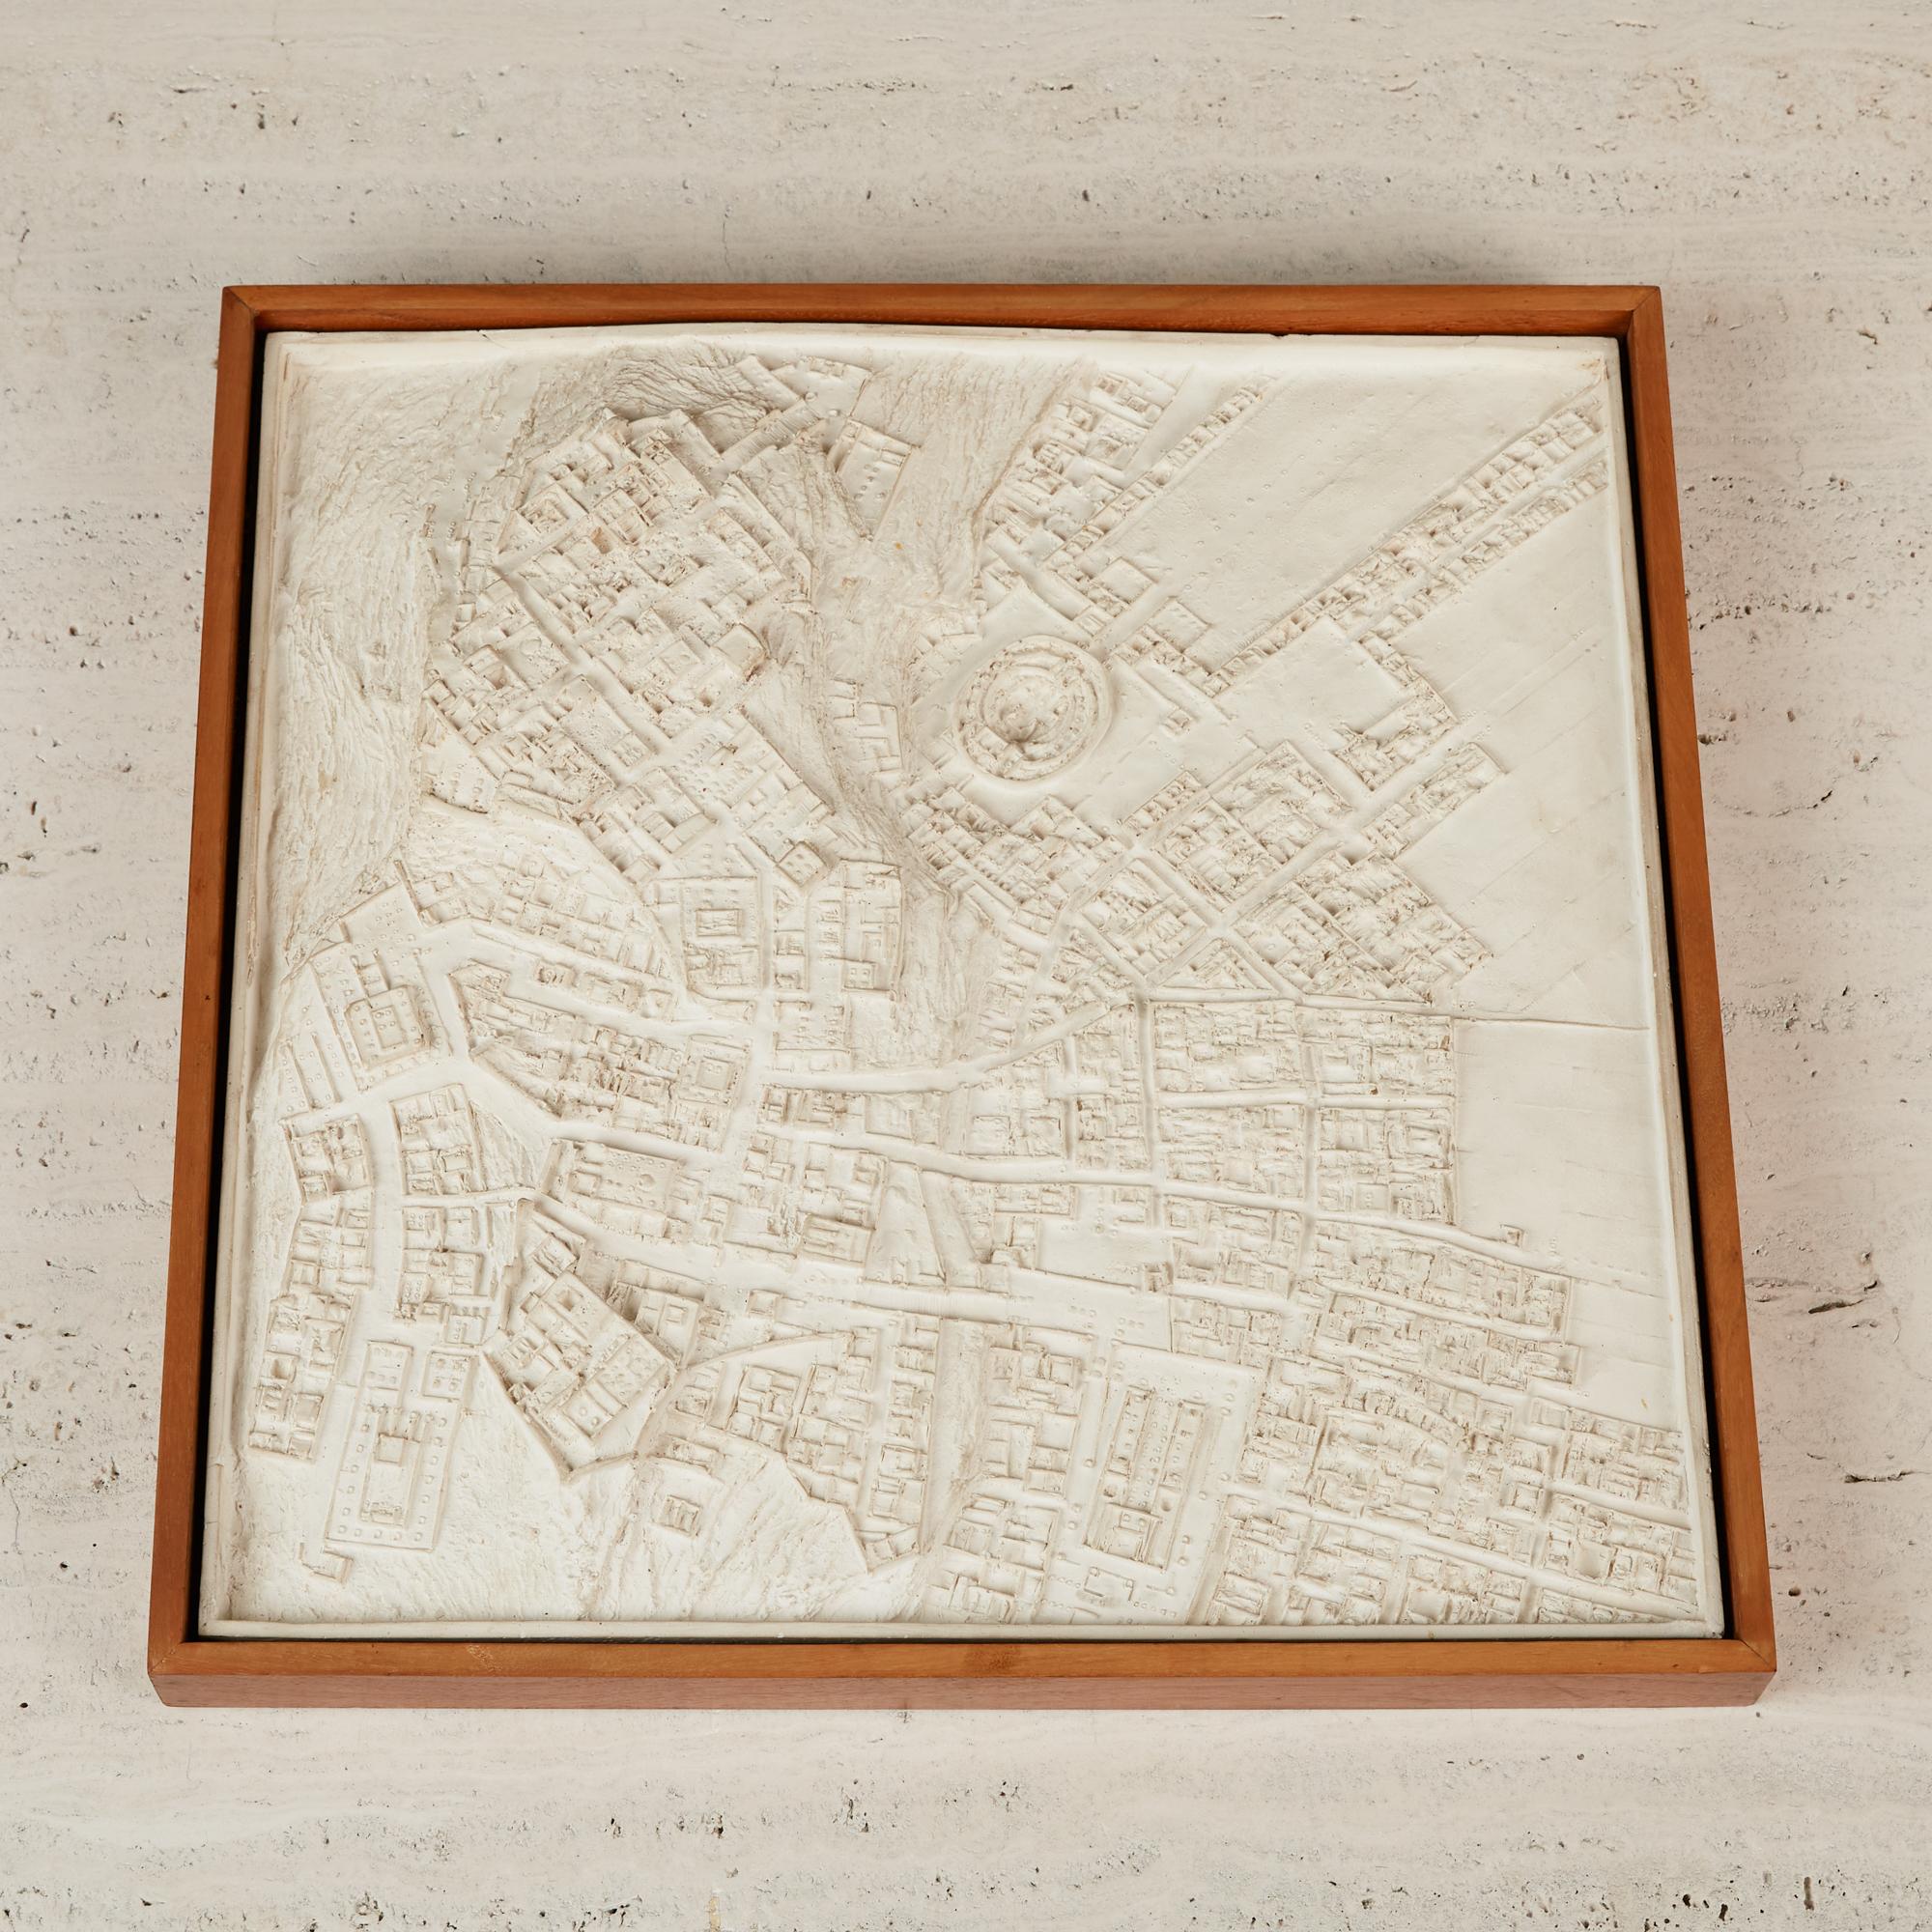 Made from glazed ceramic, this wall art is like a topographic map of a village with a small colosseum from the time of the Roman Empire. Though chances are more likely that it is something that the artist conjured up with his mind rather than